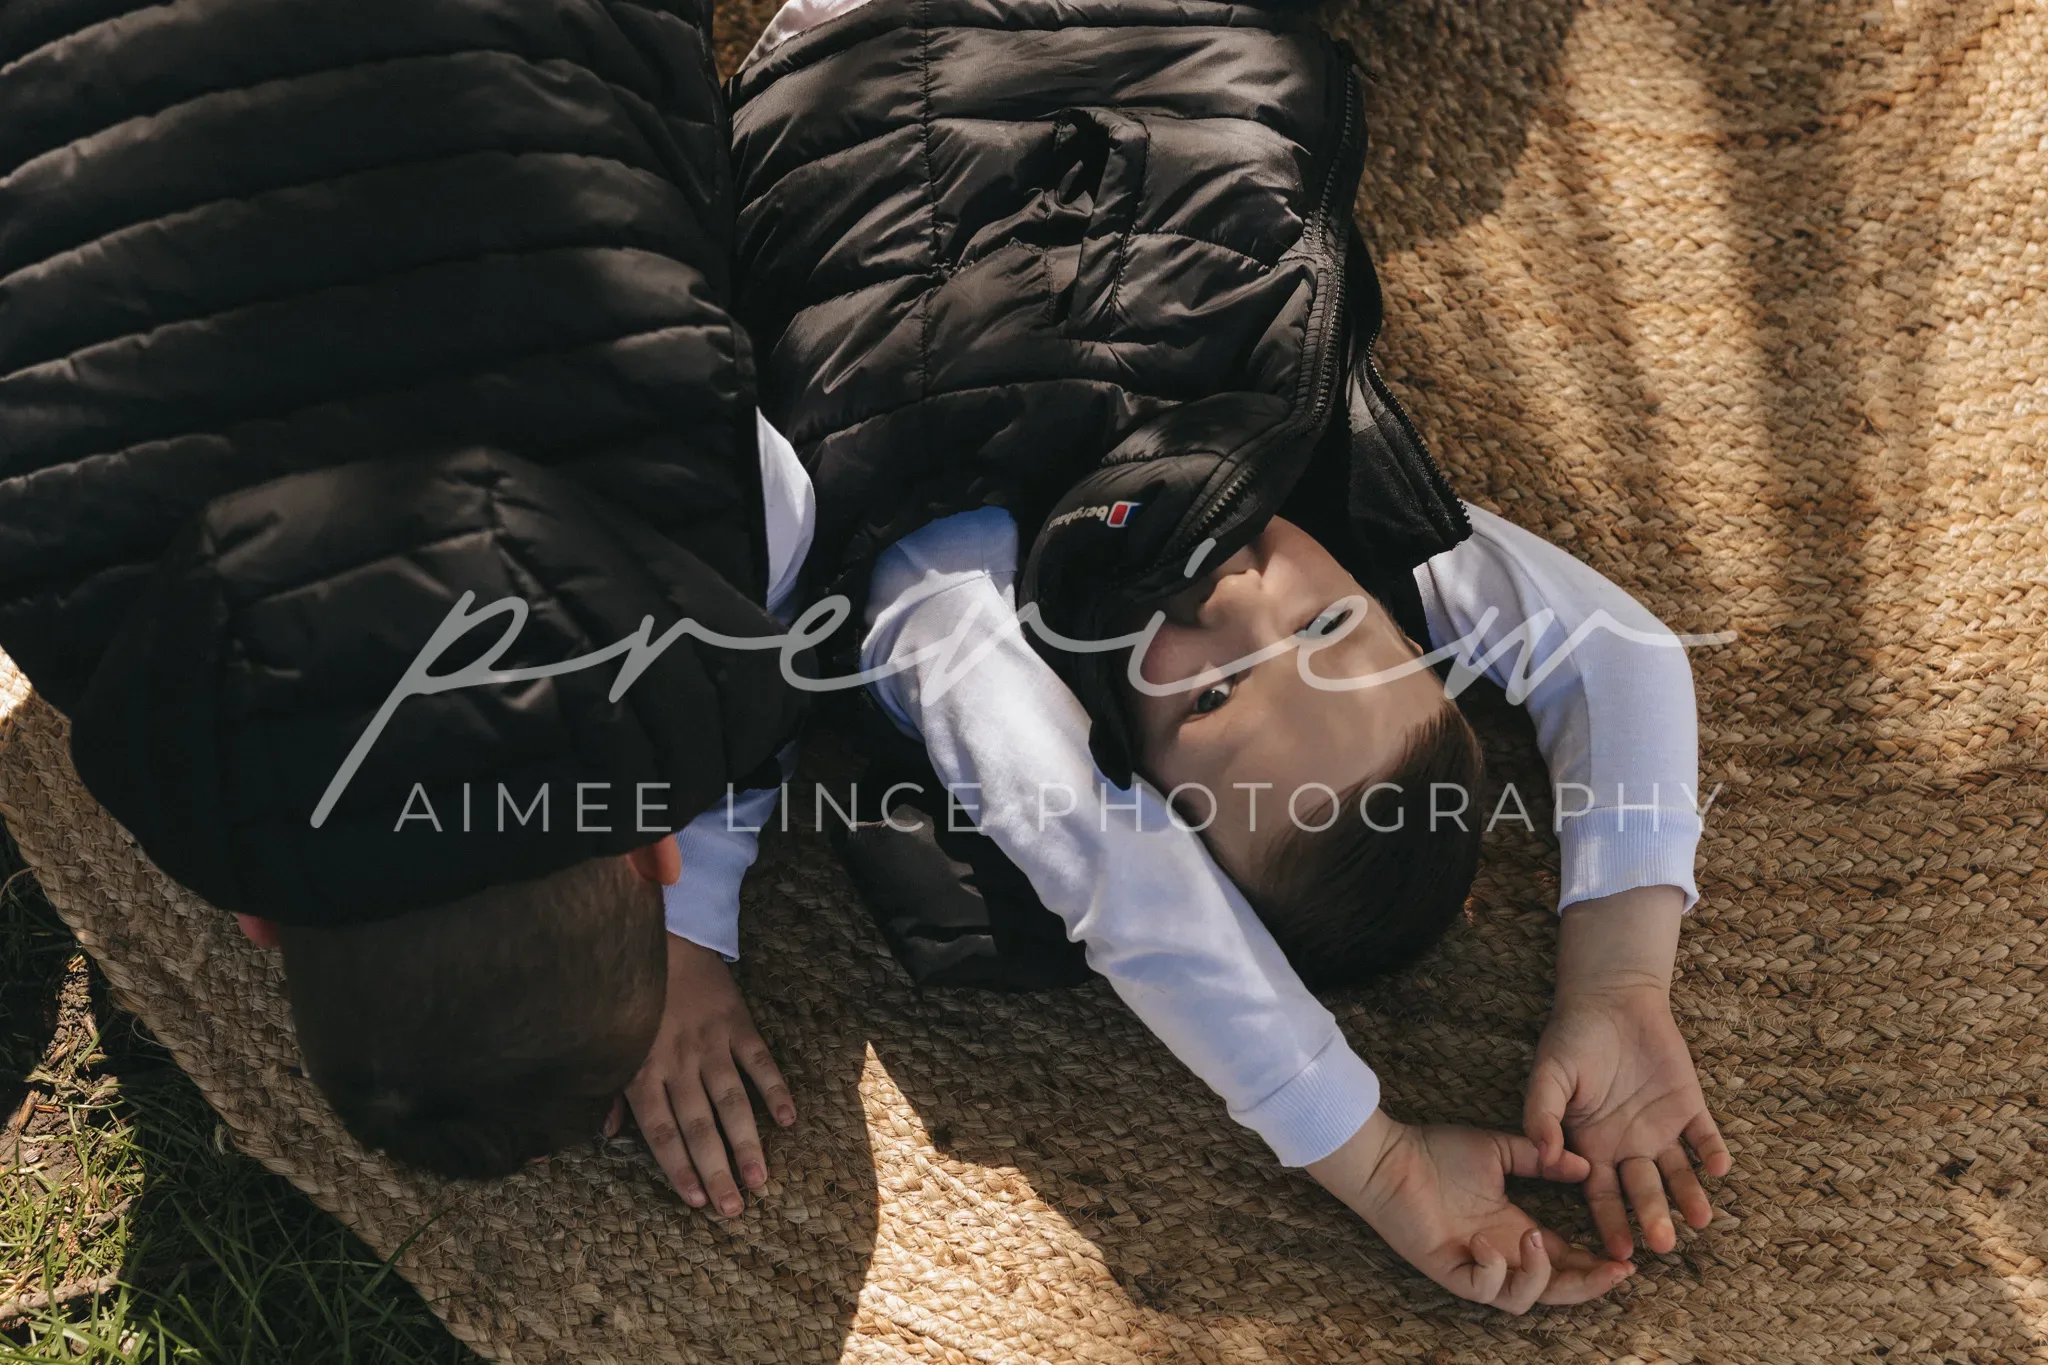 A child lies on a woven blanket outdoors, partly covered by a black puffer jacket. the sun casts shadows of nearby leaves across the scene, adding a serene and natural ambiance.